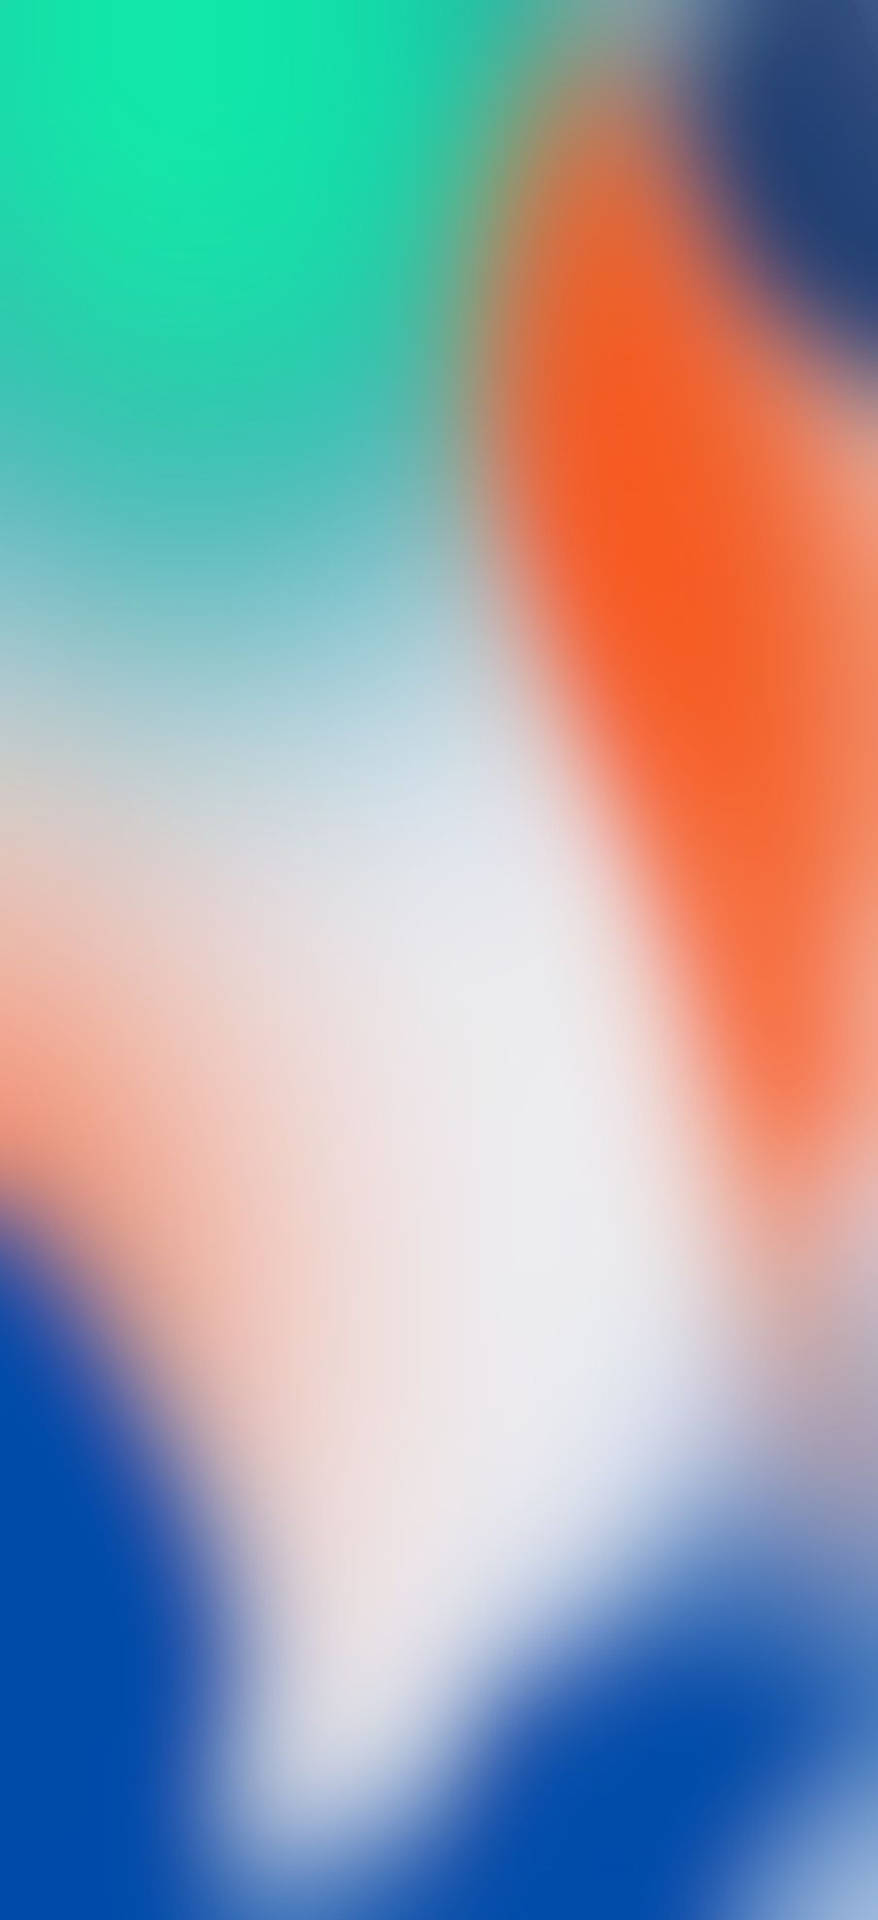 Free Iphone X Wallpaper Downloads, [200+] Iphone X Wallpapers for FREE |  